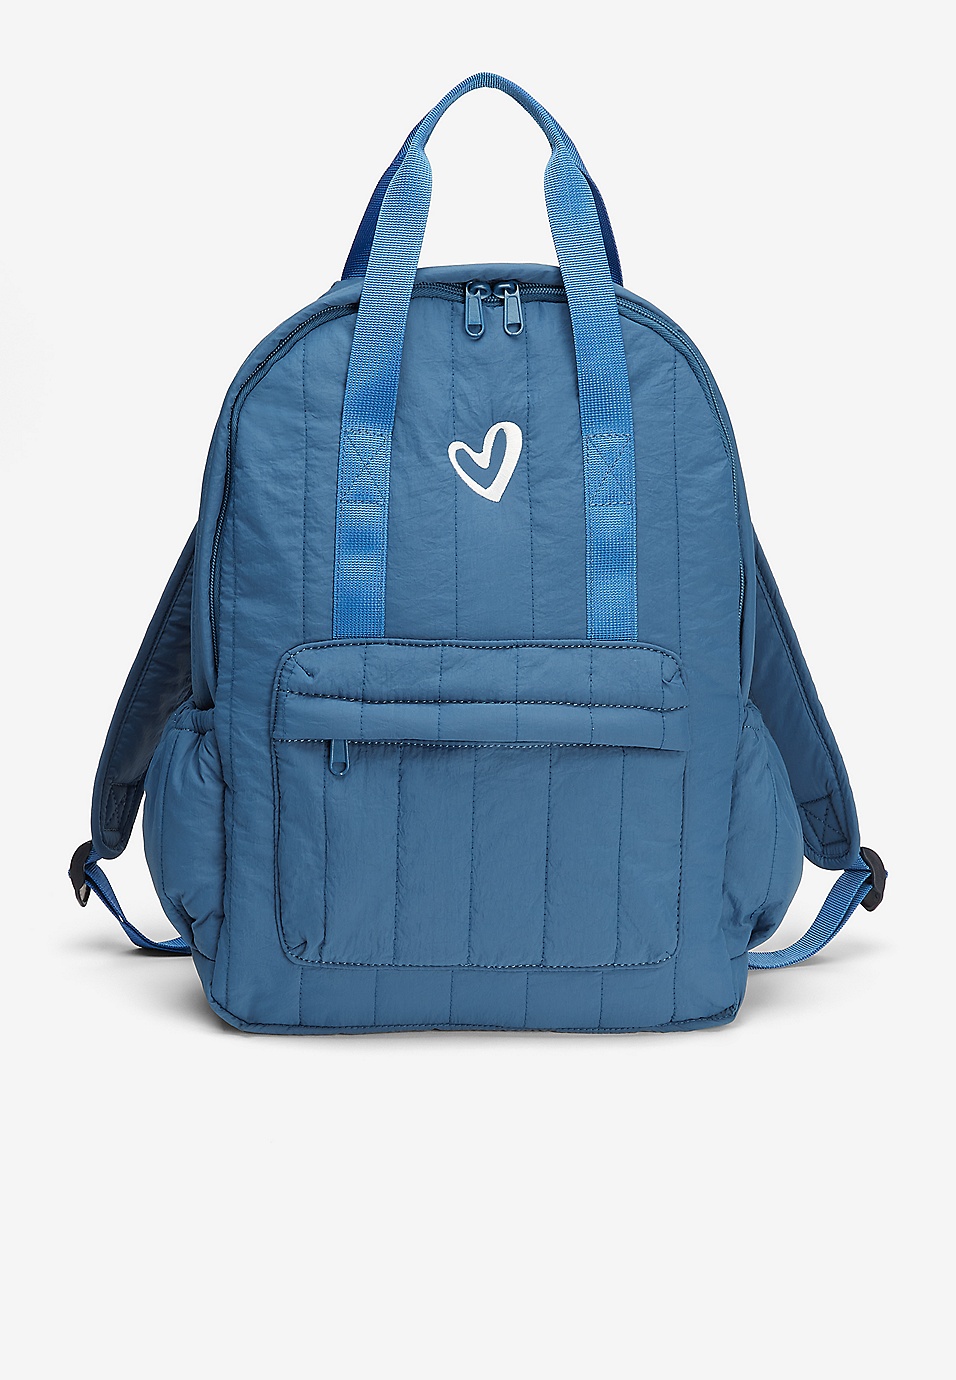 Imported backpack with stationary for kids